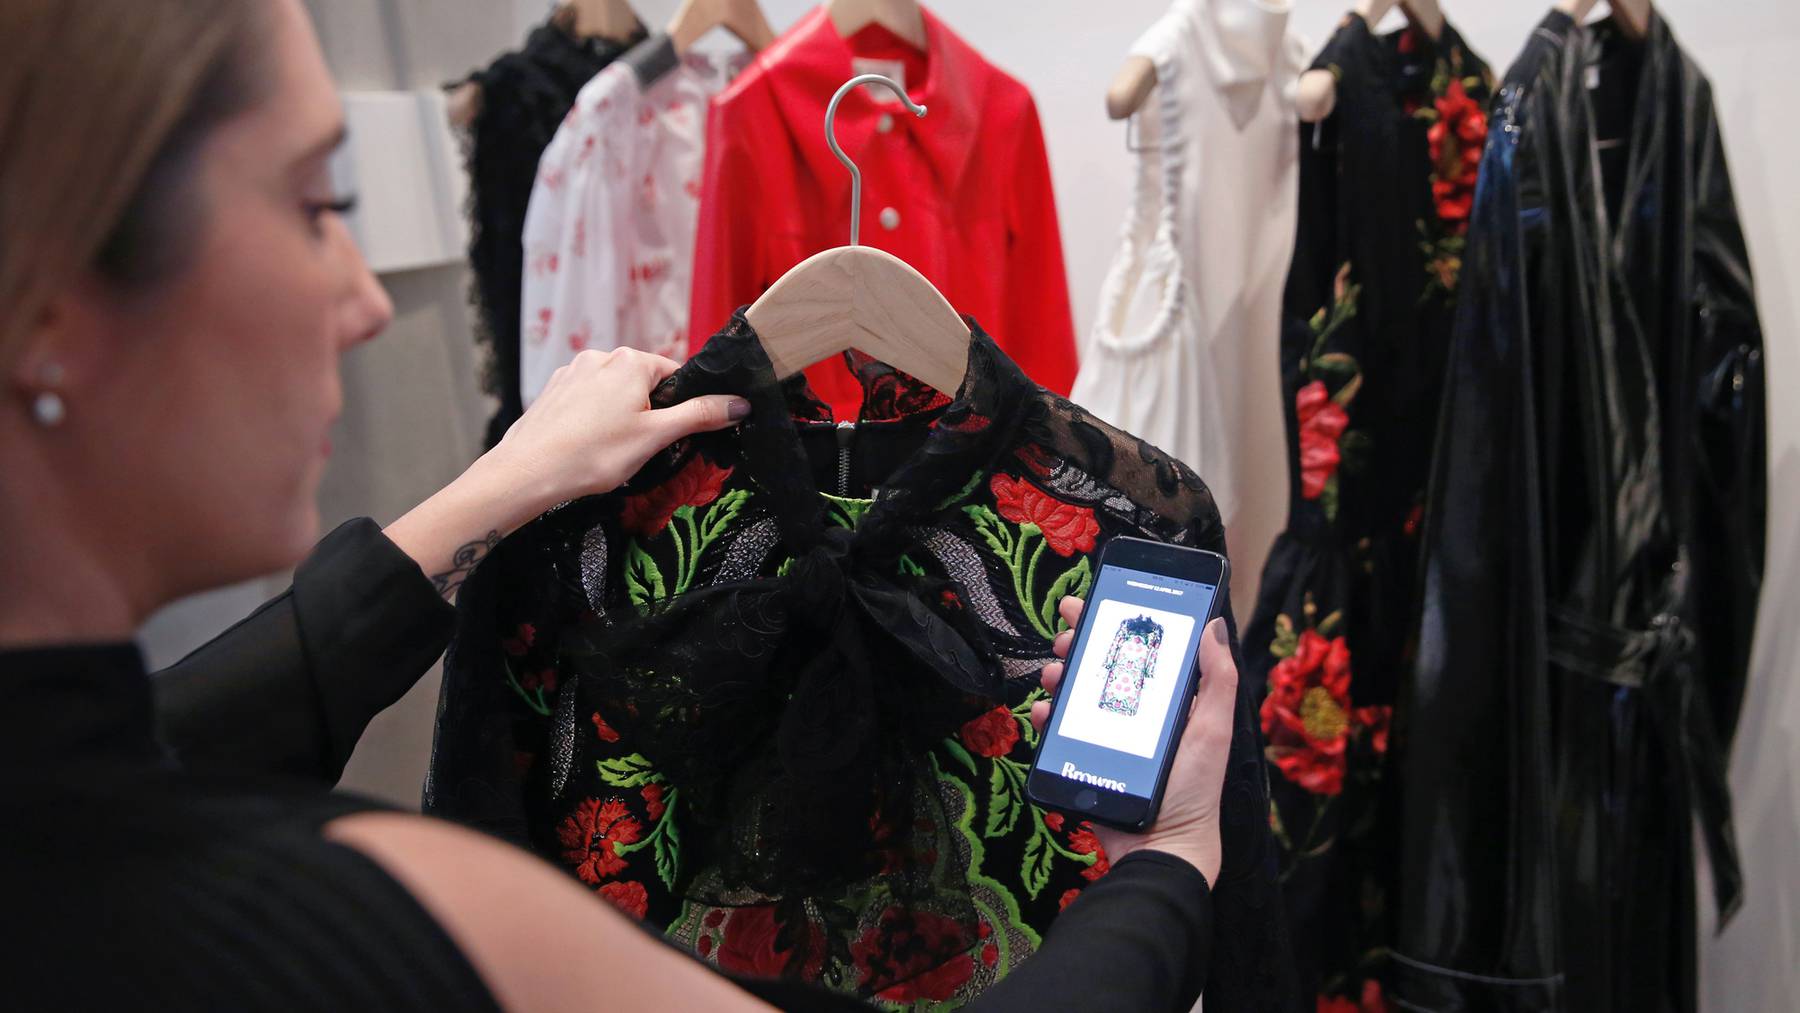 A Farfetch employee uses an app linked to store products at the launch of the "Store of the Future" exhibition at the Design Museum in London